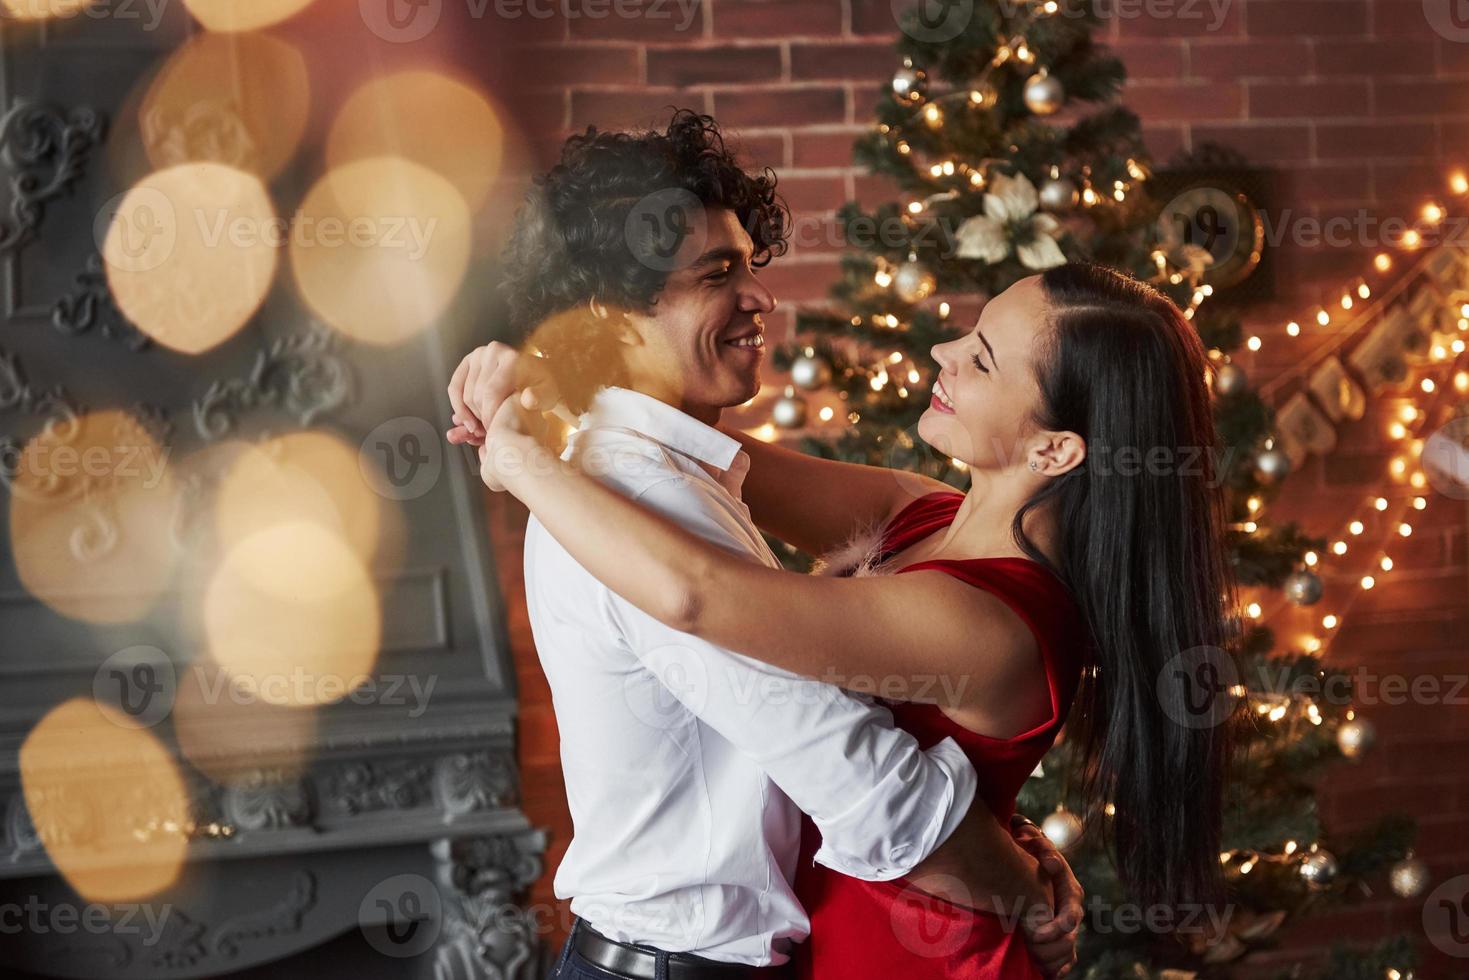 Having good time. New Year's evening dancing. Lovely gorgeous couple spending time together photo